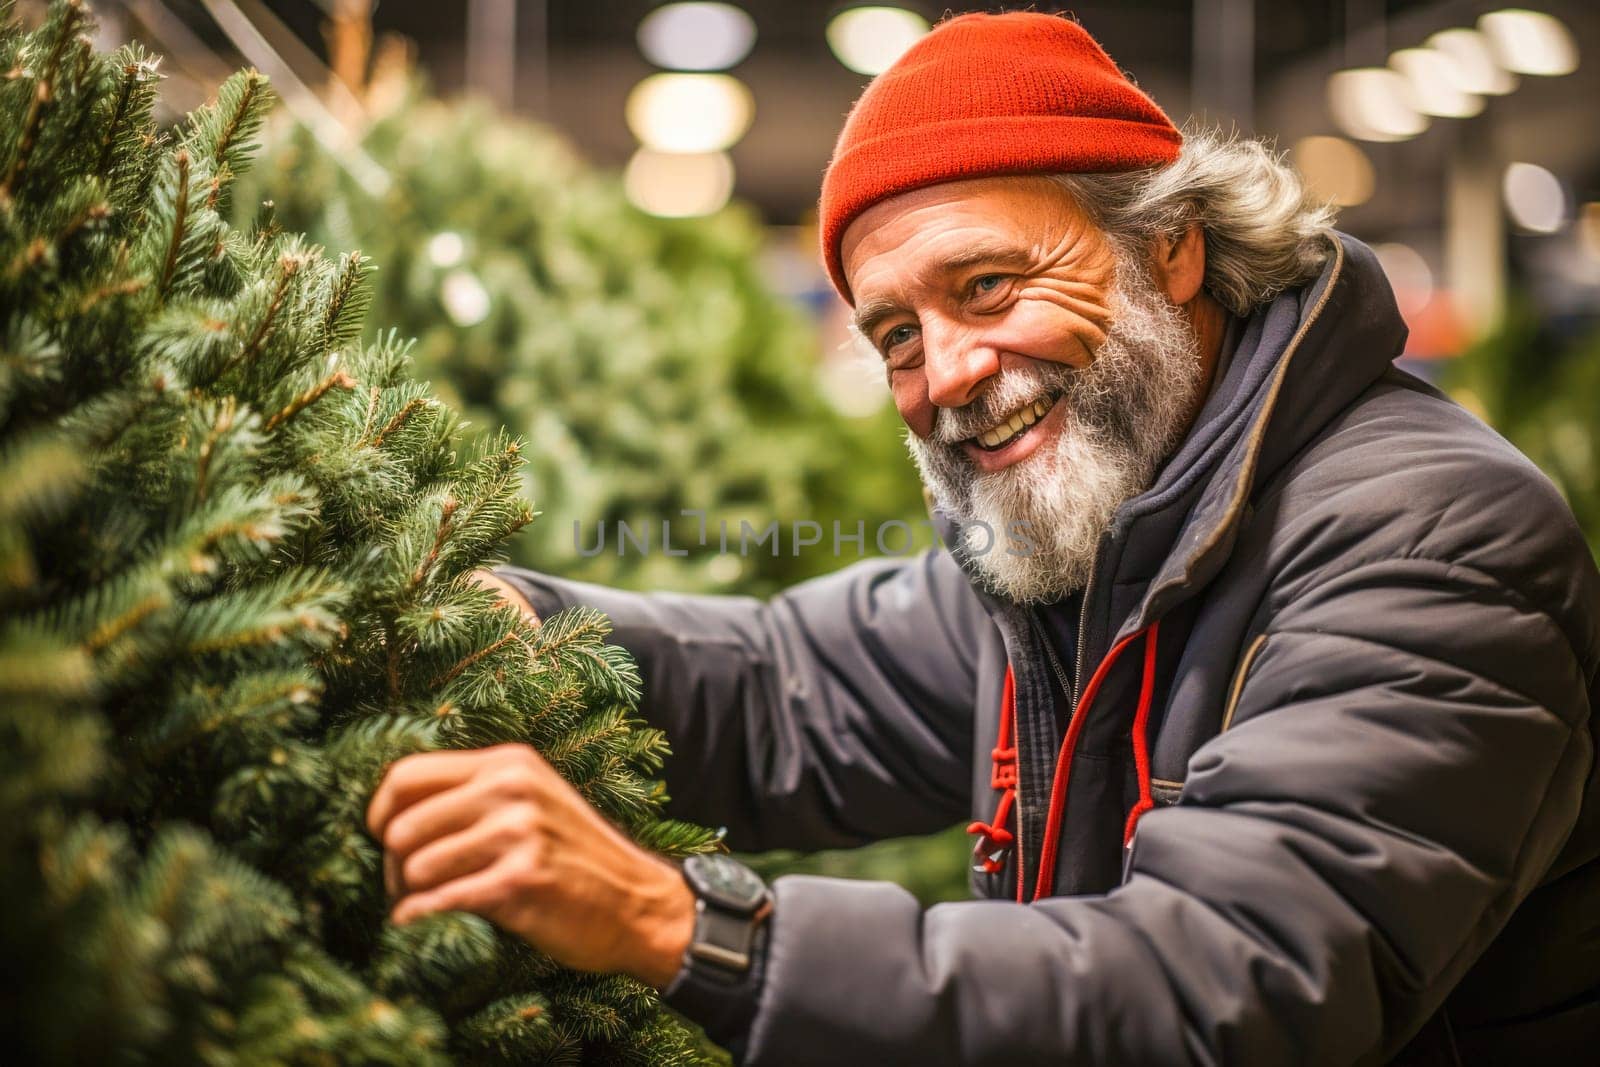 A man carefully buys a beautiful Christmas tree at the pre-holiday market to decorate his home and create a festive atmosphere.